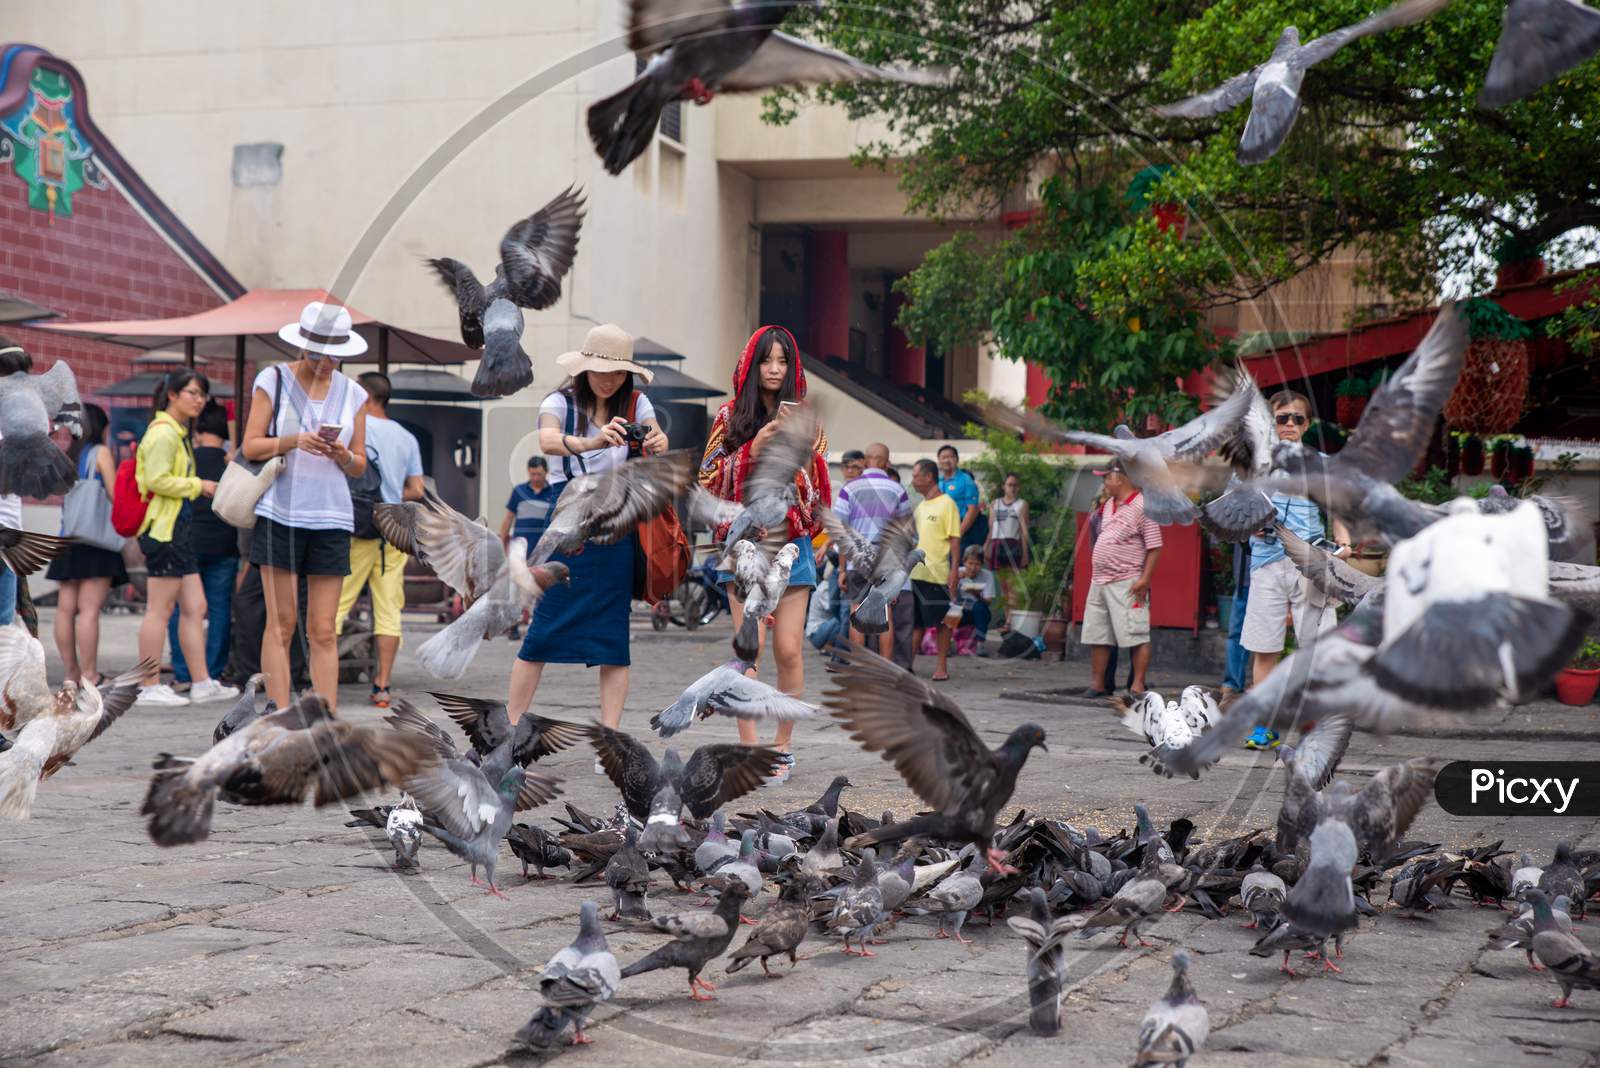 Tourist View The Pigeon Fly In Front Of Goddess Of Mercy Temple